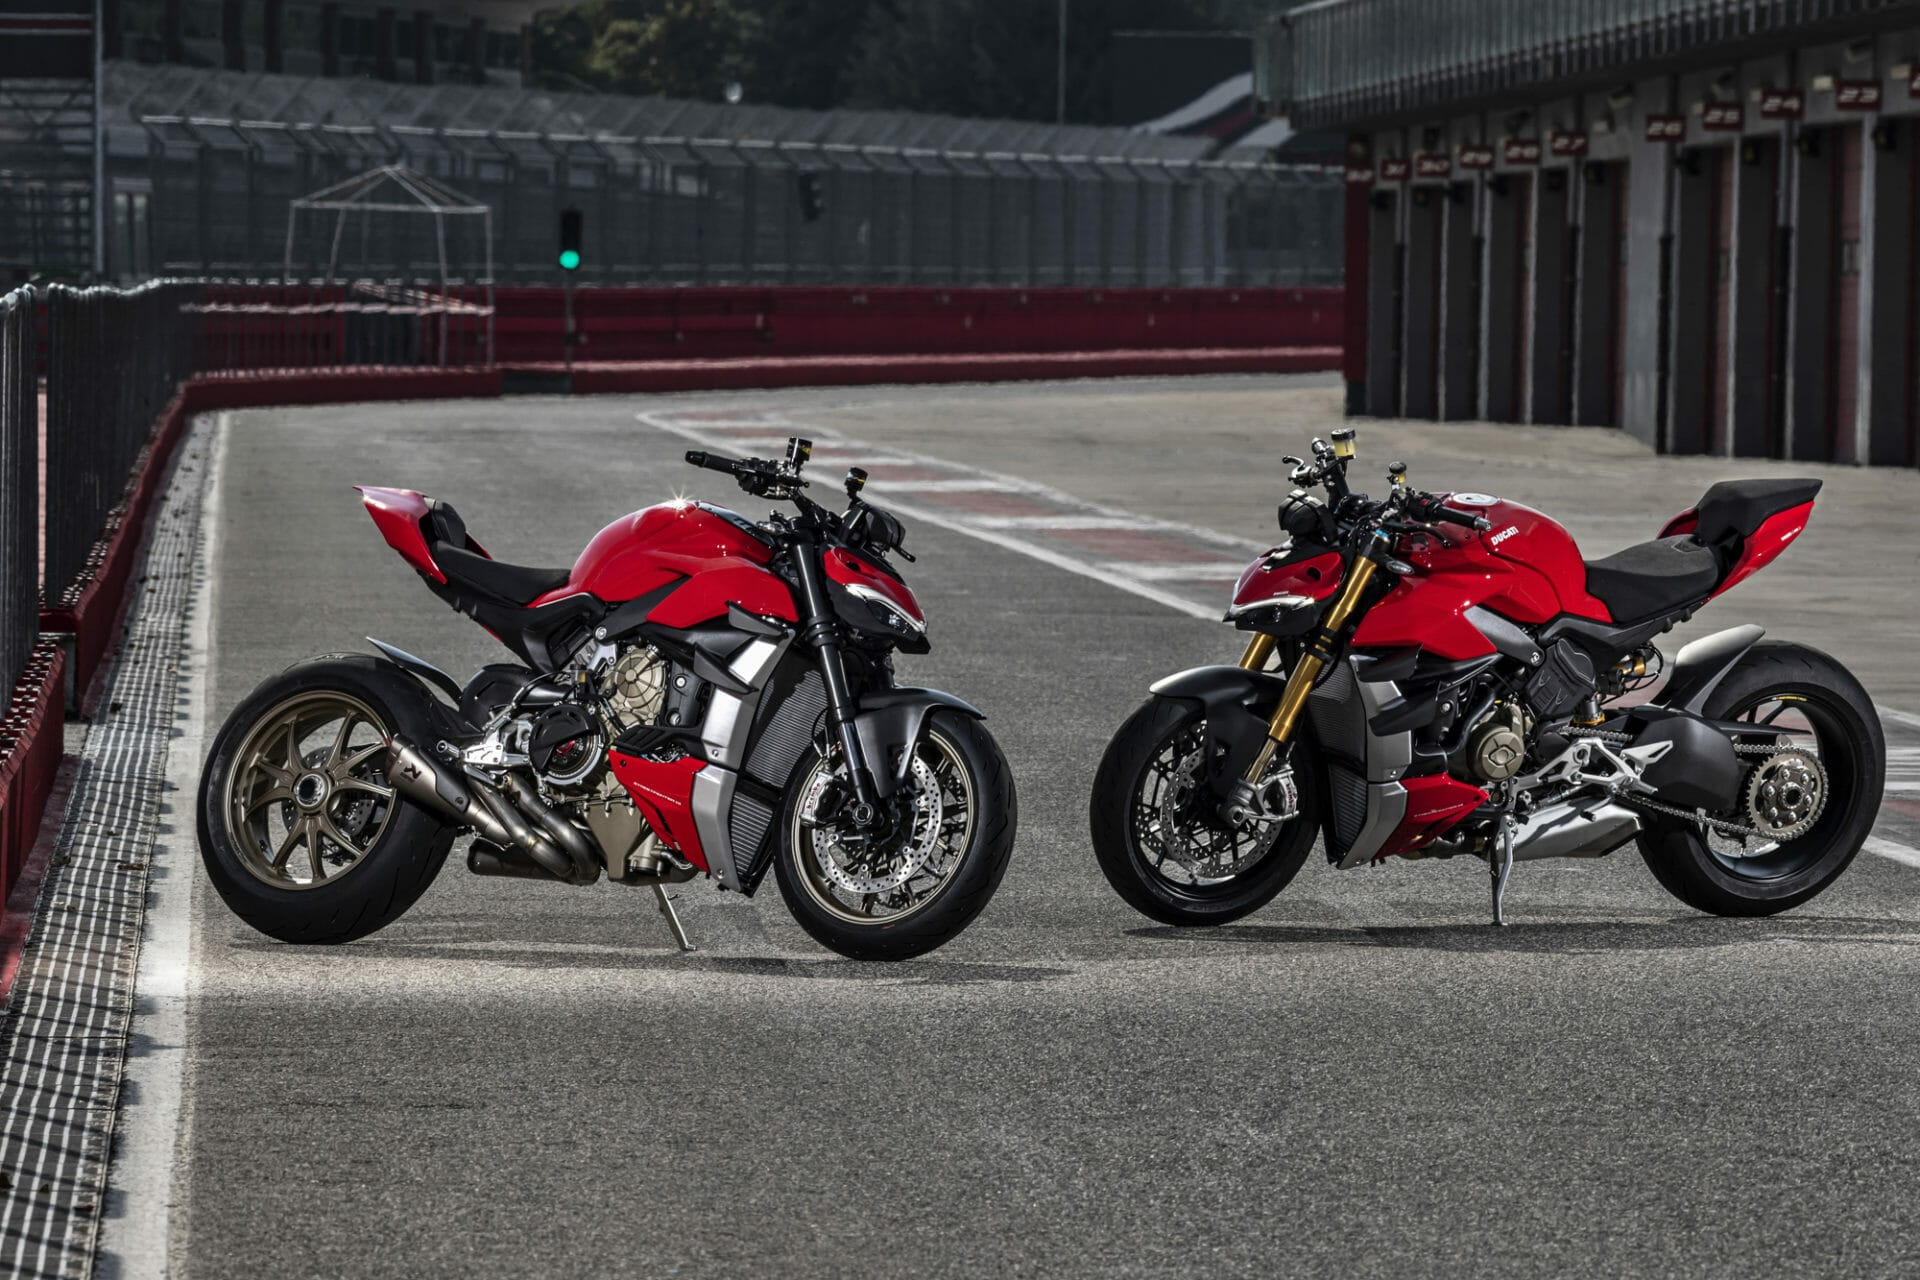 Recall: Ducati Streeetfighter V4 and V4S
- also in the App MOTORCYCLE NEWS